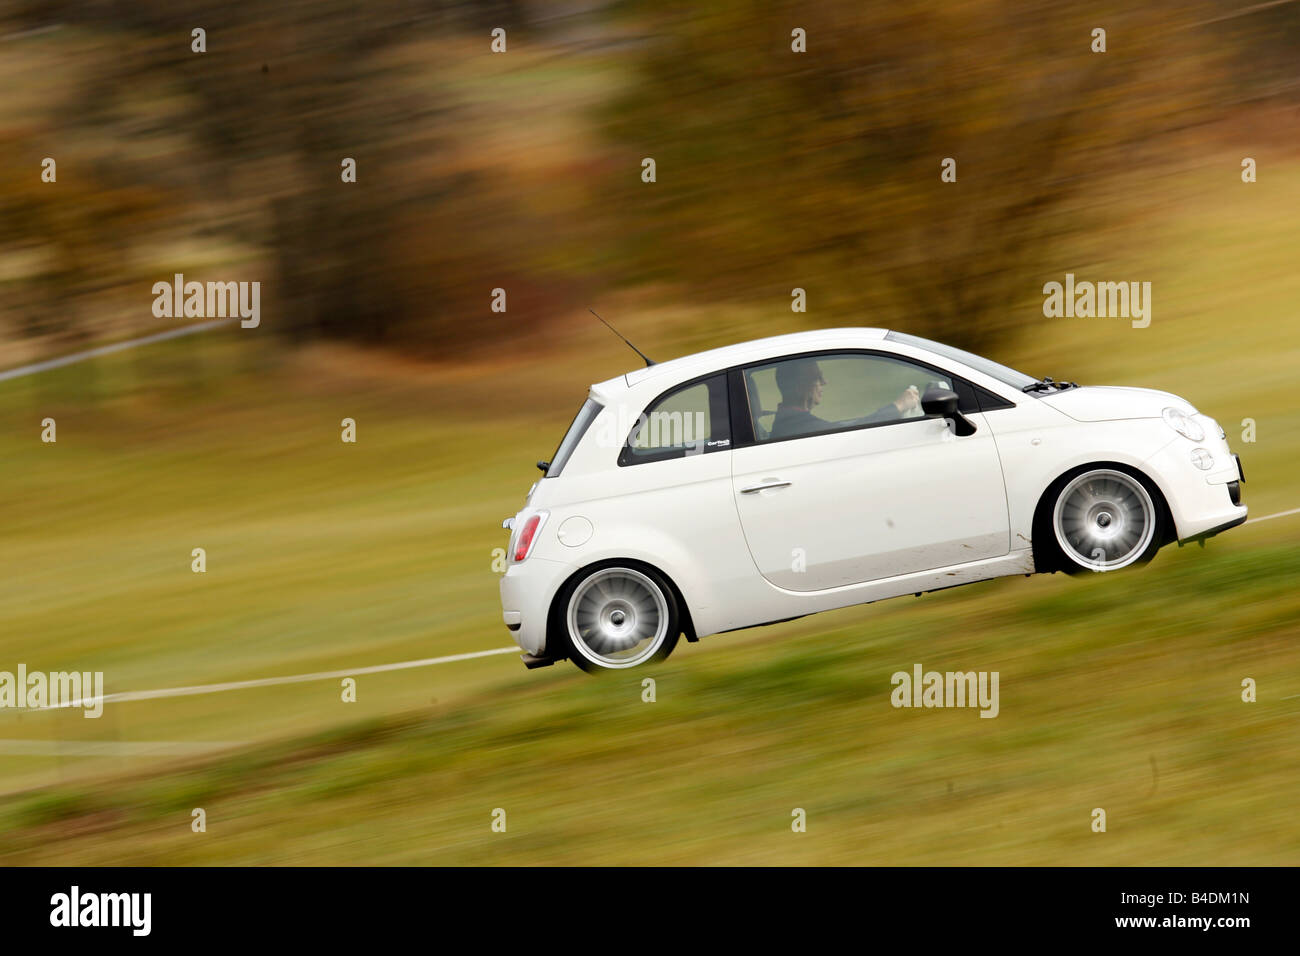 Fiat 500 Cartech-Knowledge, white, model year 2007-, driving, side view, country road Stock Photo